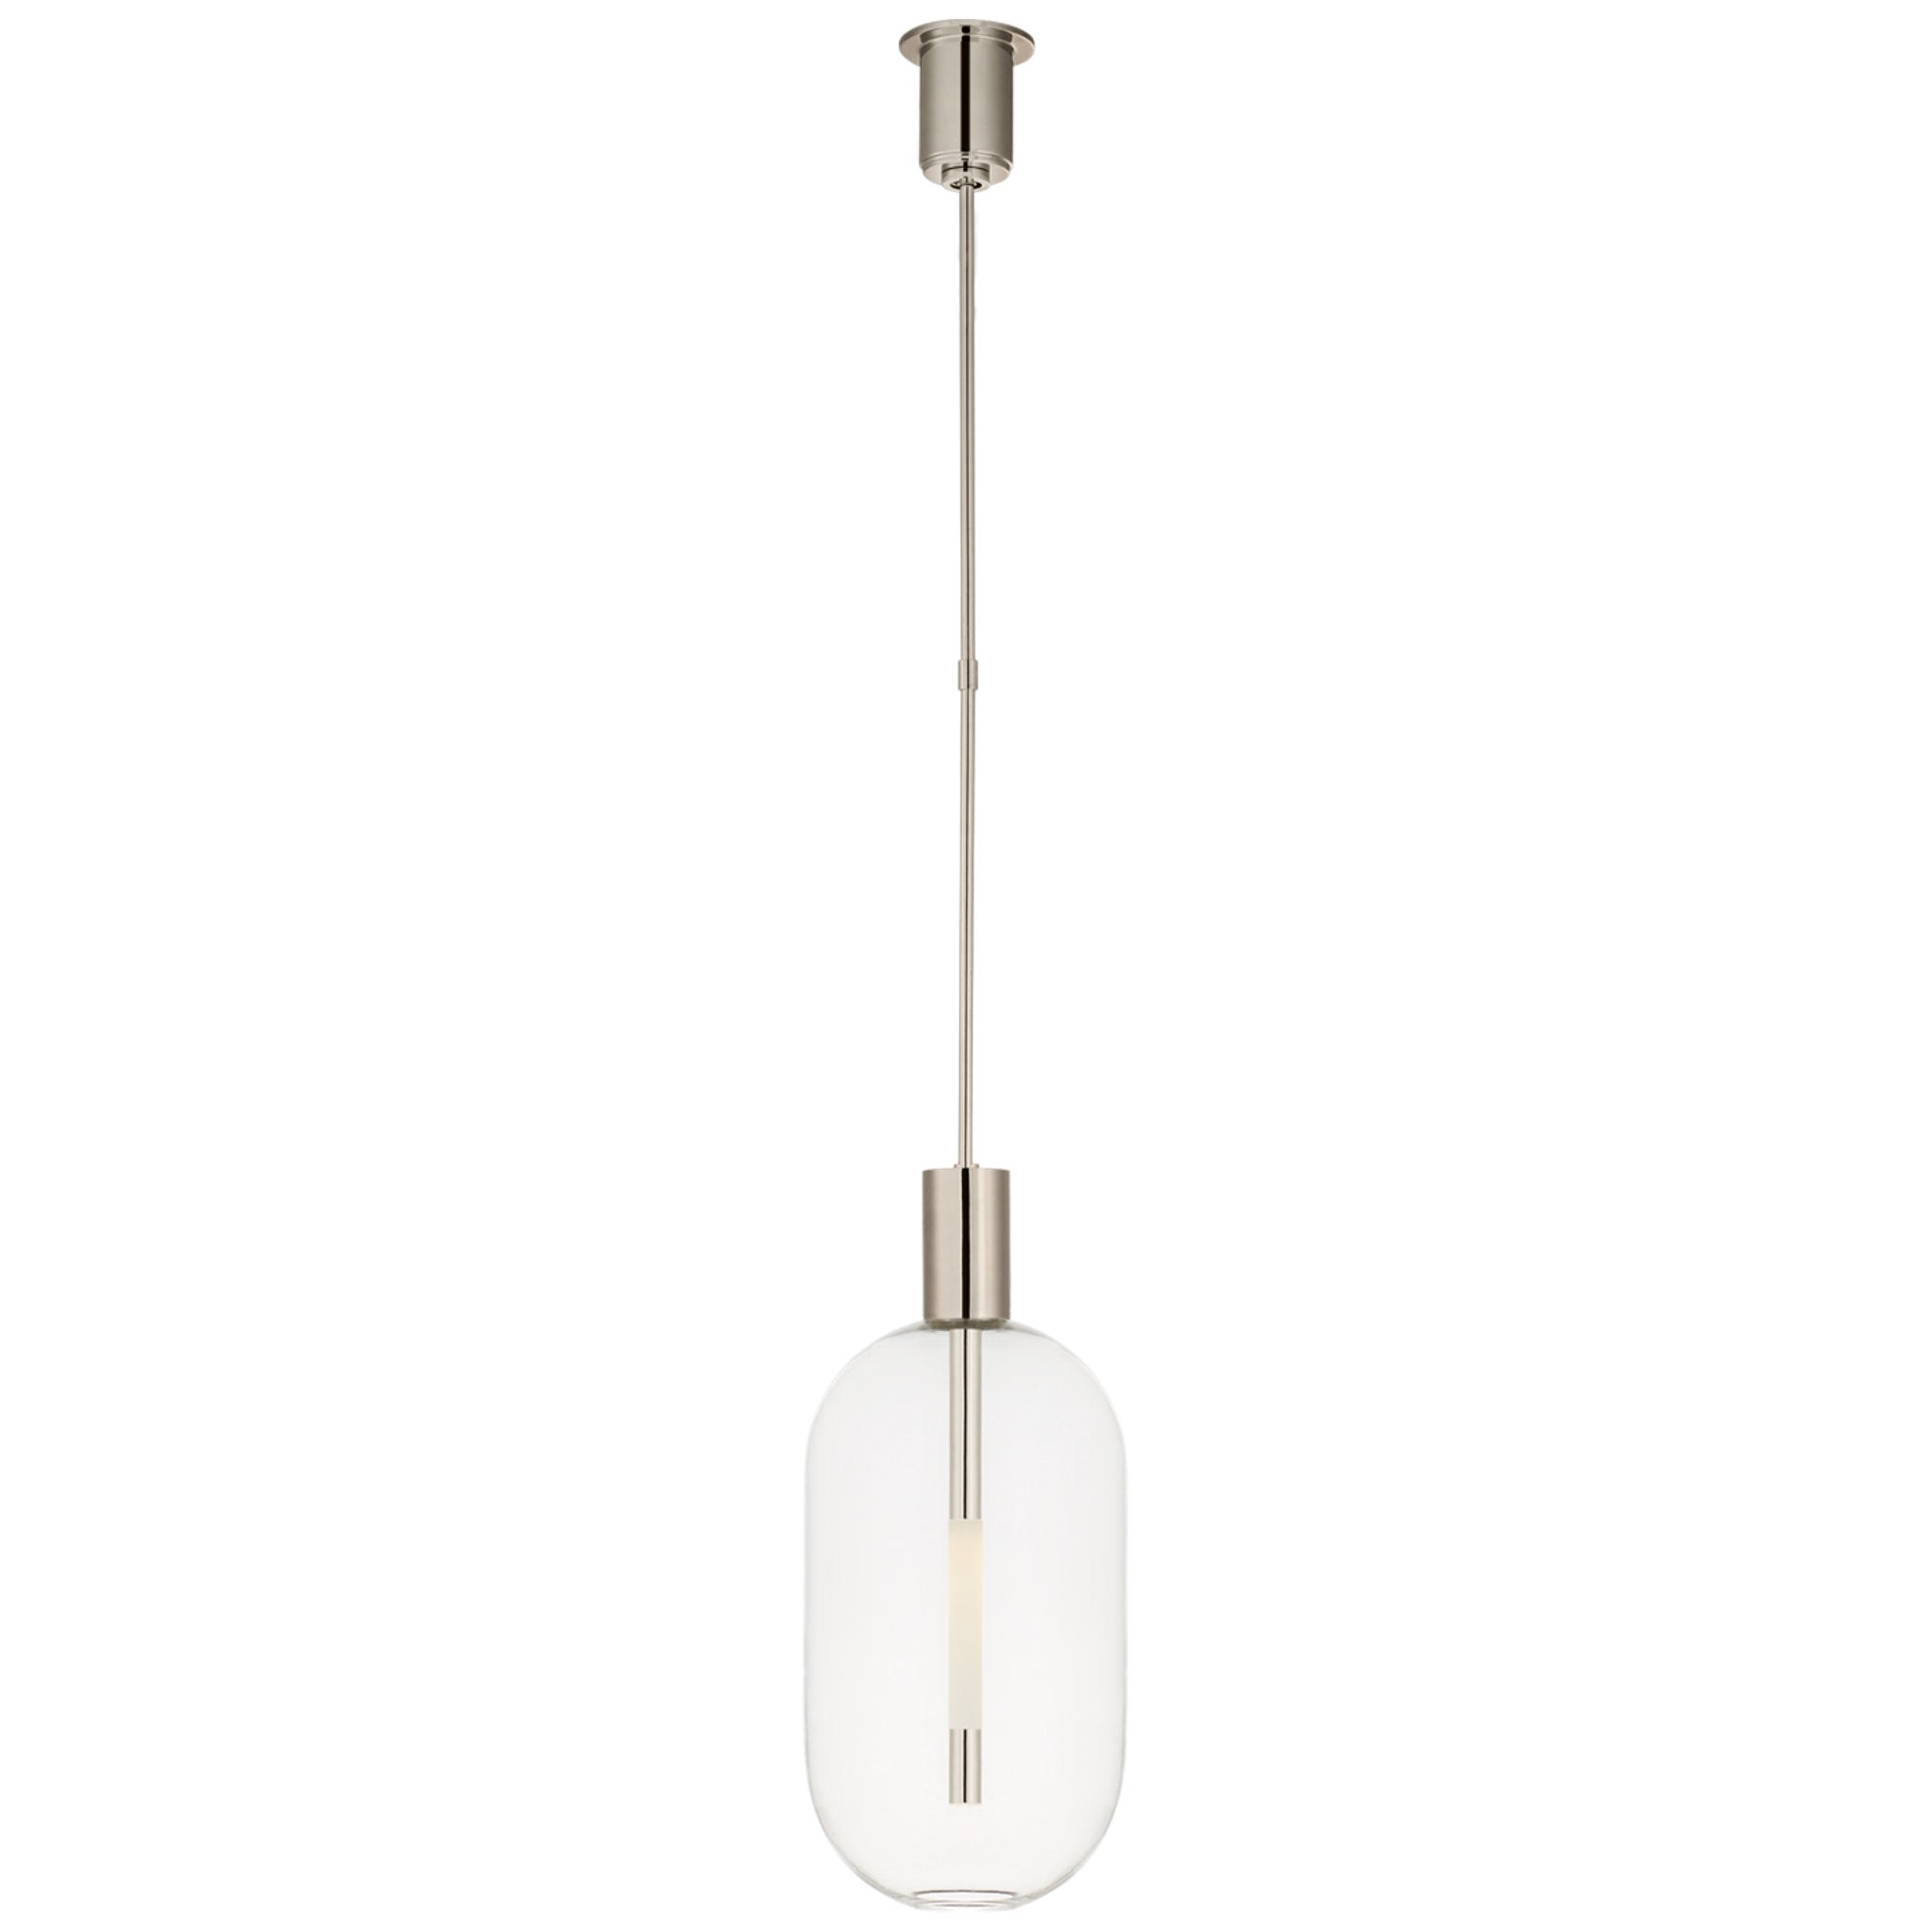 Kelly Wearstler Nye Tall Pendant in Polished Nickel with Clear Glass